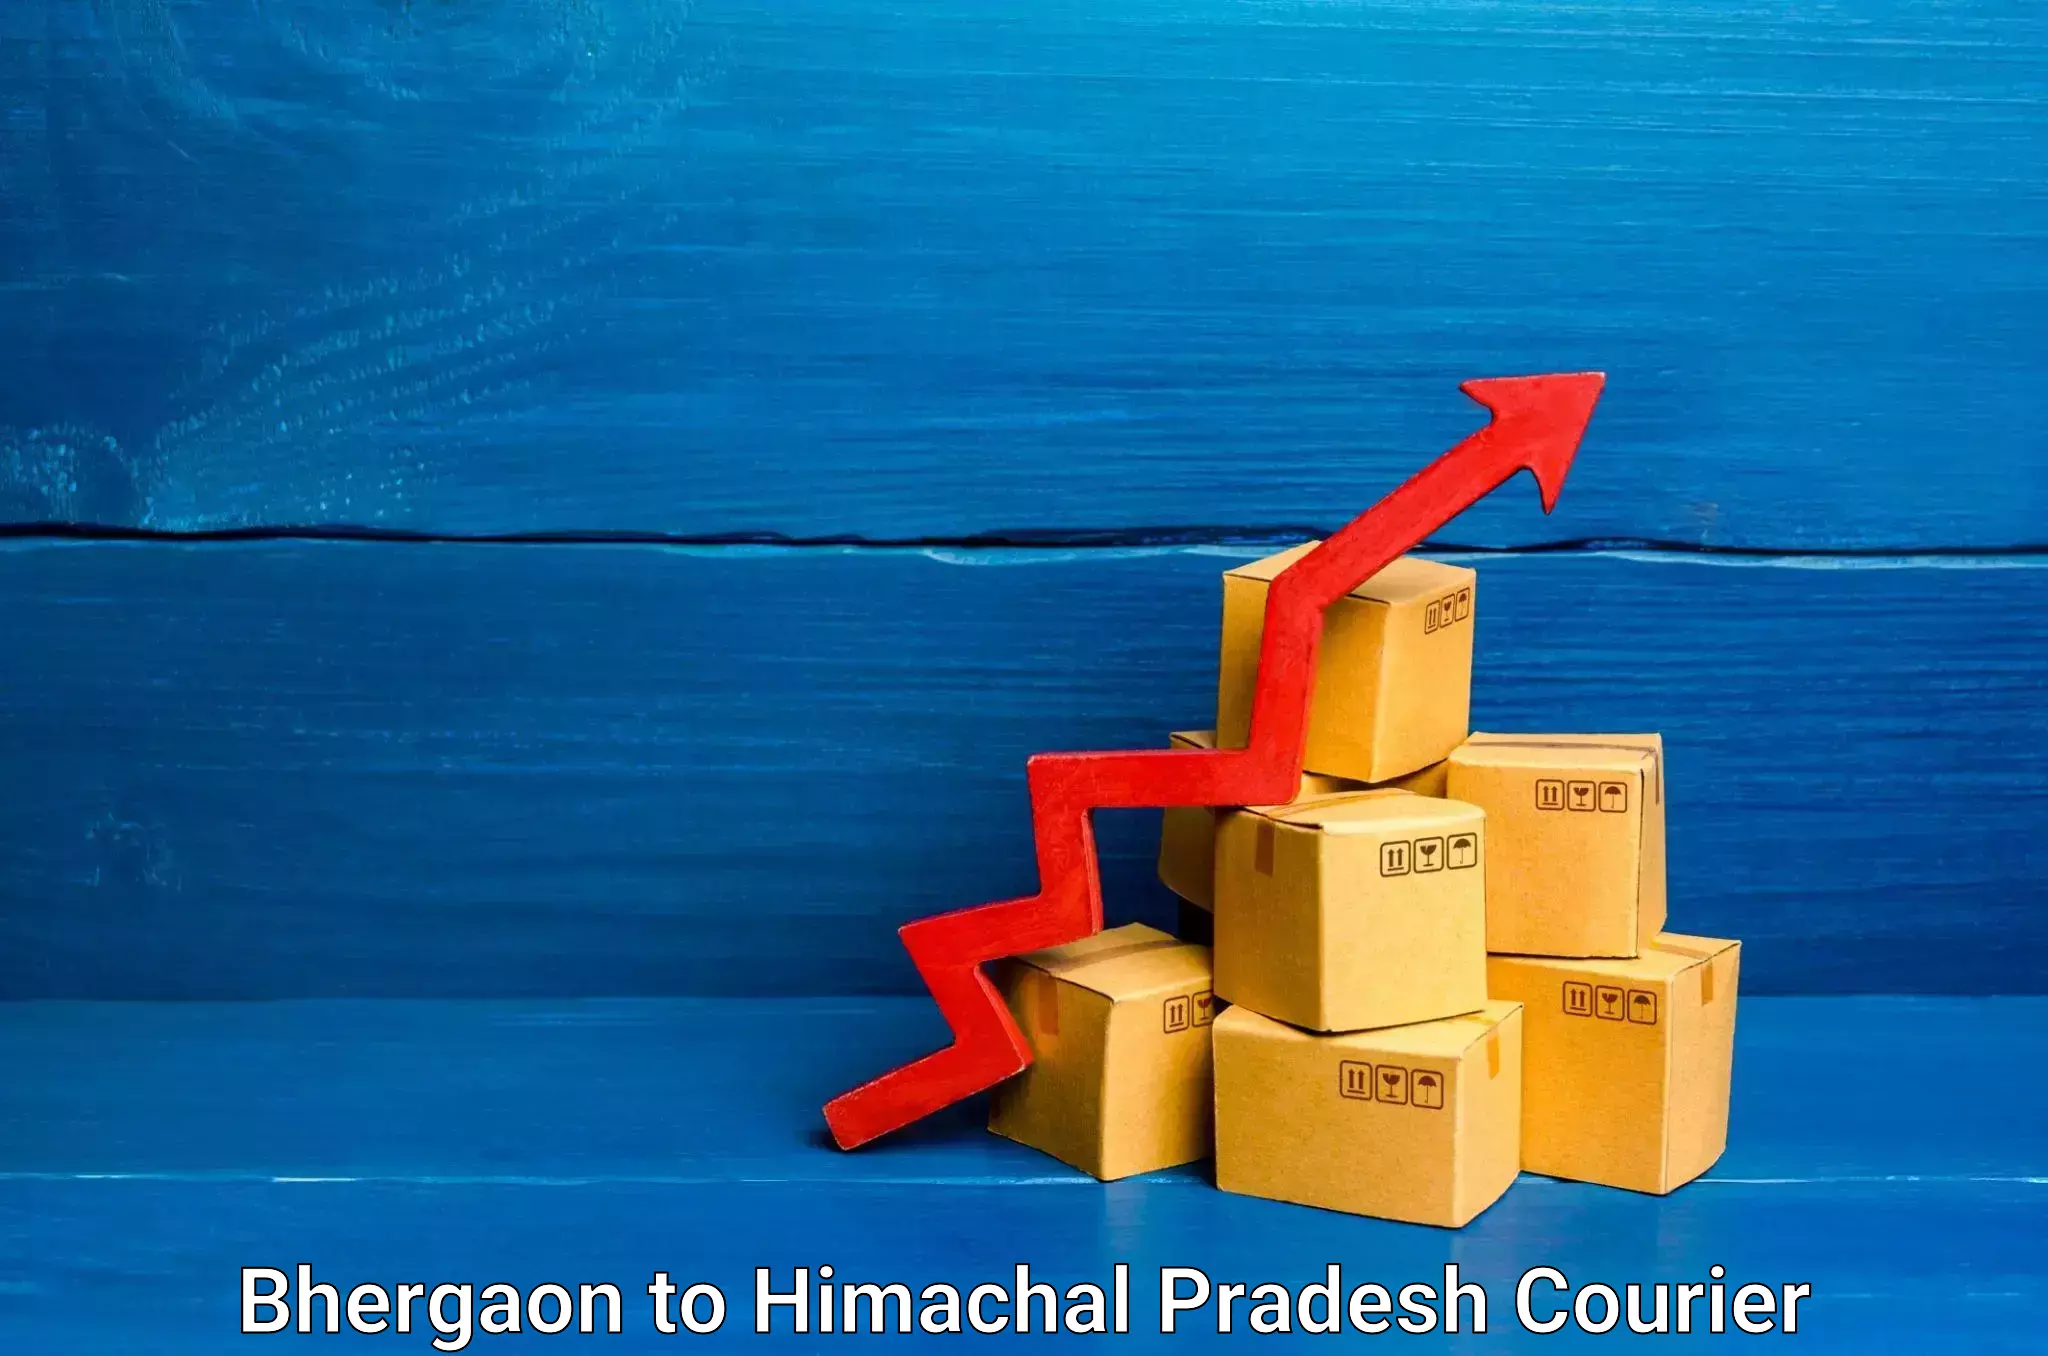 Cash on delivery service Bhergaon to Himachal Pradesh